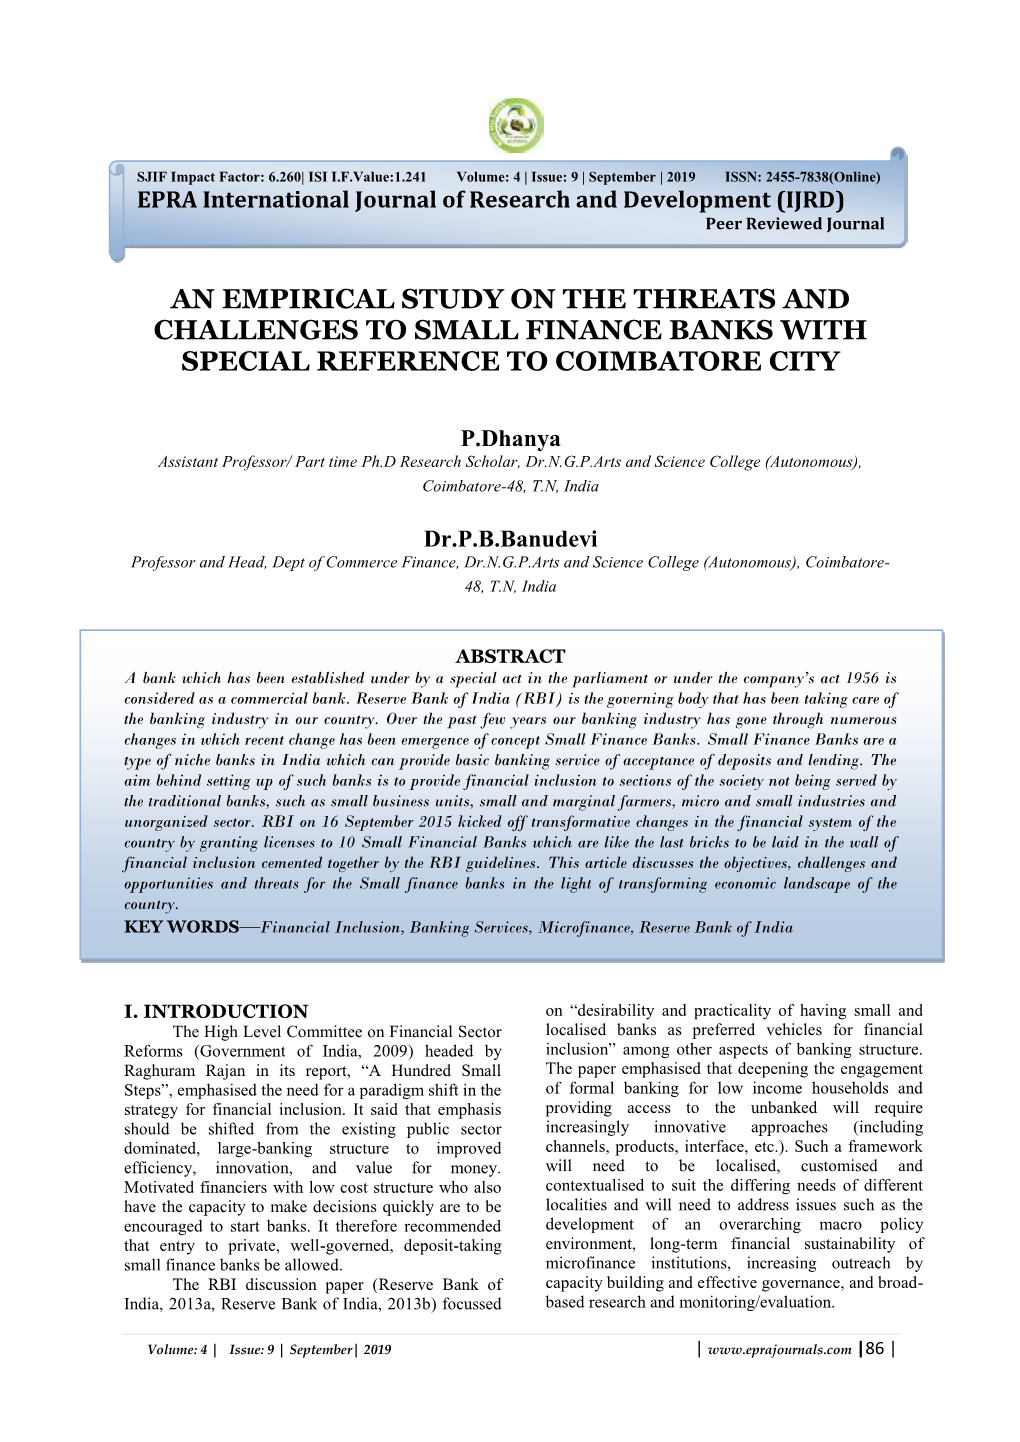 An Empirical Study on the Threats and Challenges to Small Finance Banks with Special Reference to Coimbatore City